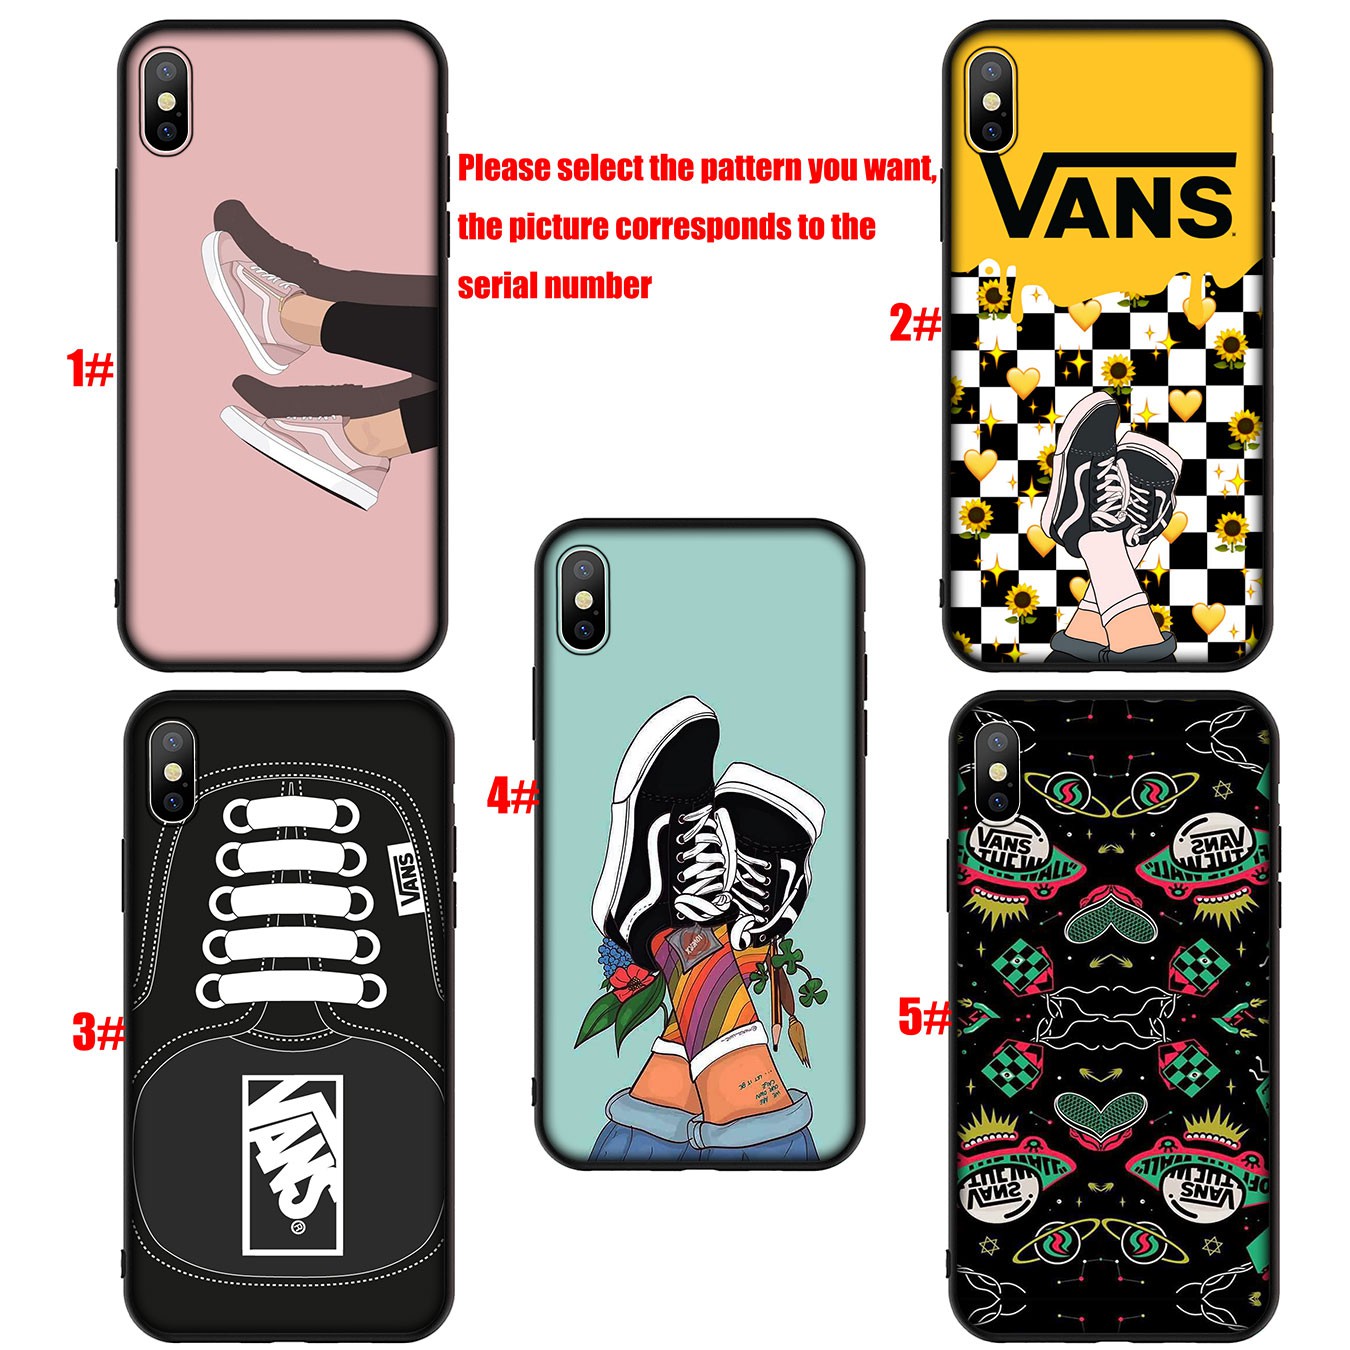 Soft Silicone iPhone 11 Pro XR X XS Max 7 8 6 6s Plus + Cover flower Logo VANS Phone Case